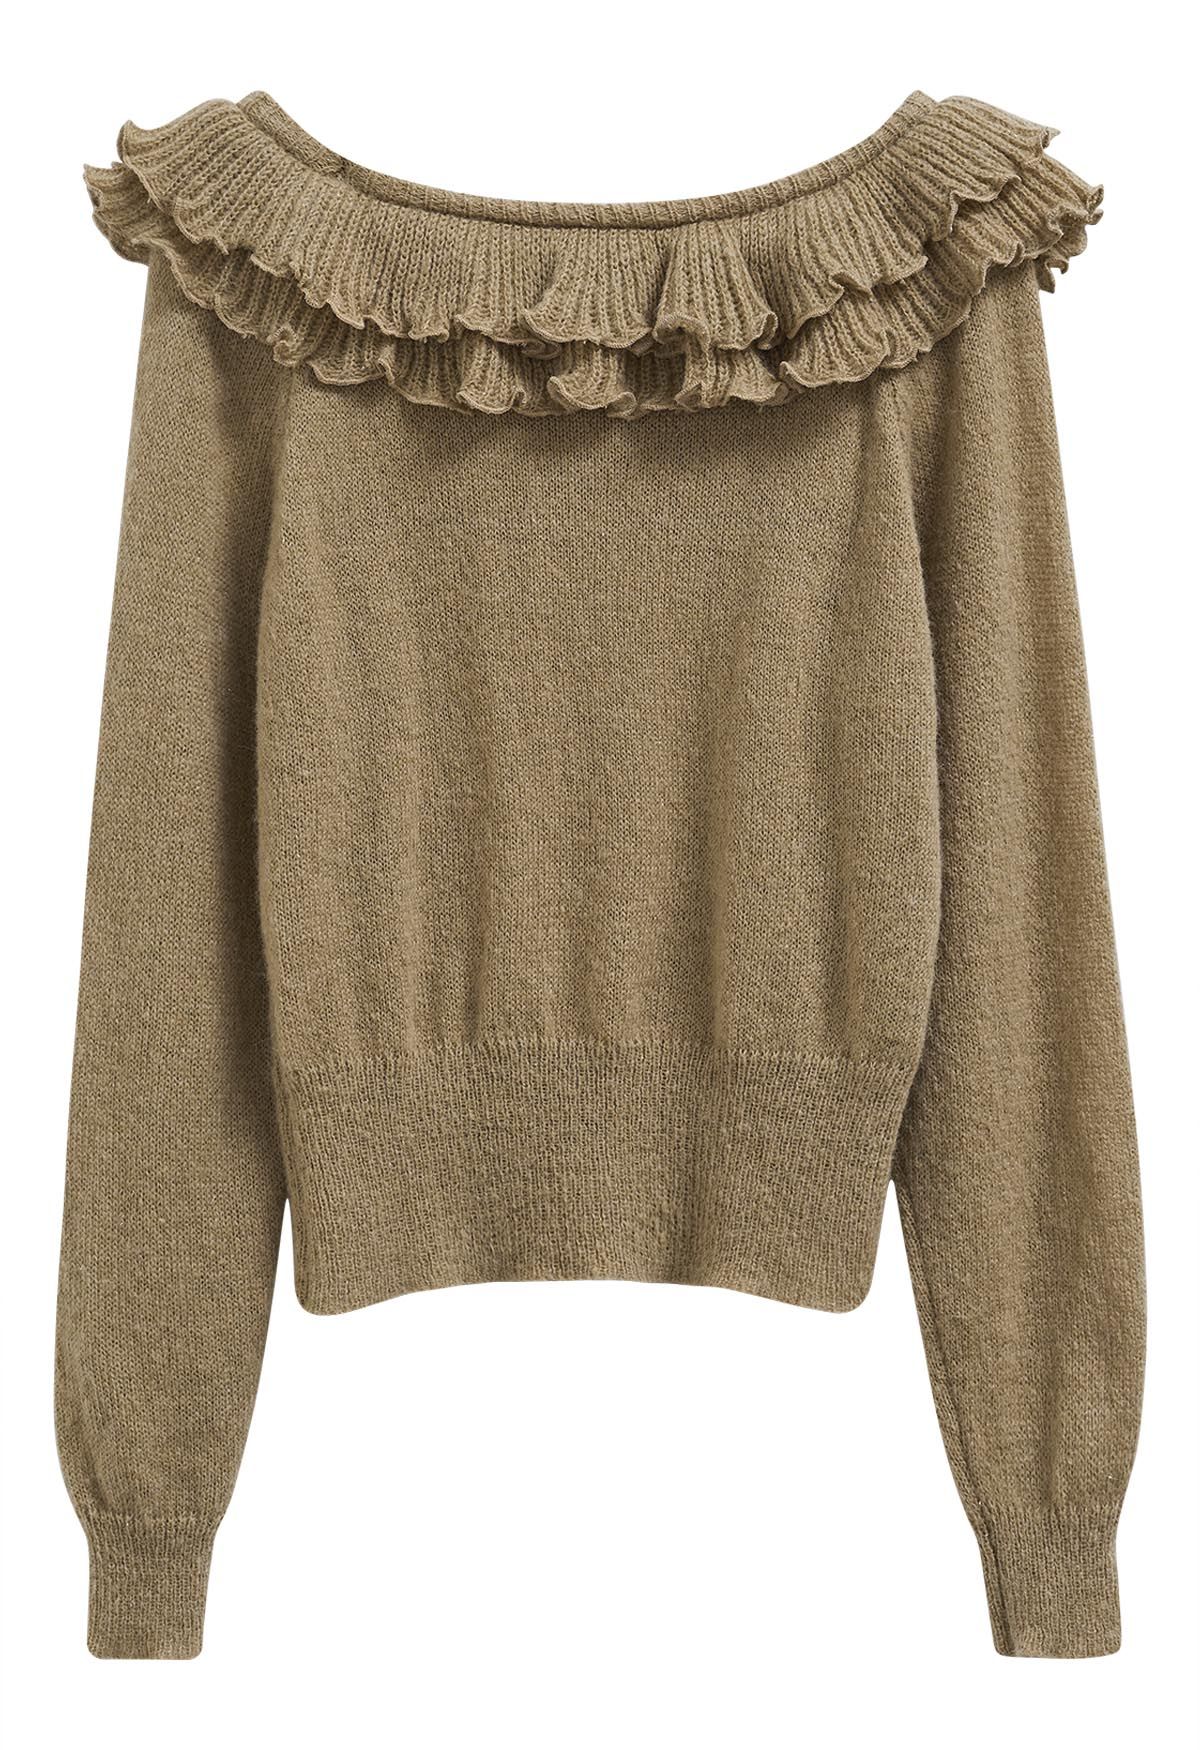 Shimmering Tiered Ruffle Off-Shoulder Knit Sweater in Camel